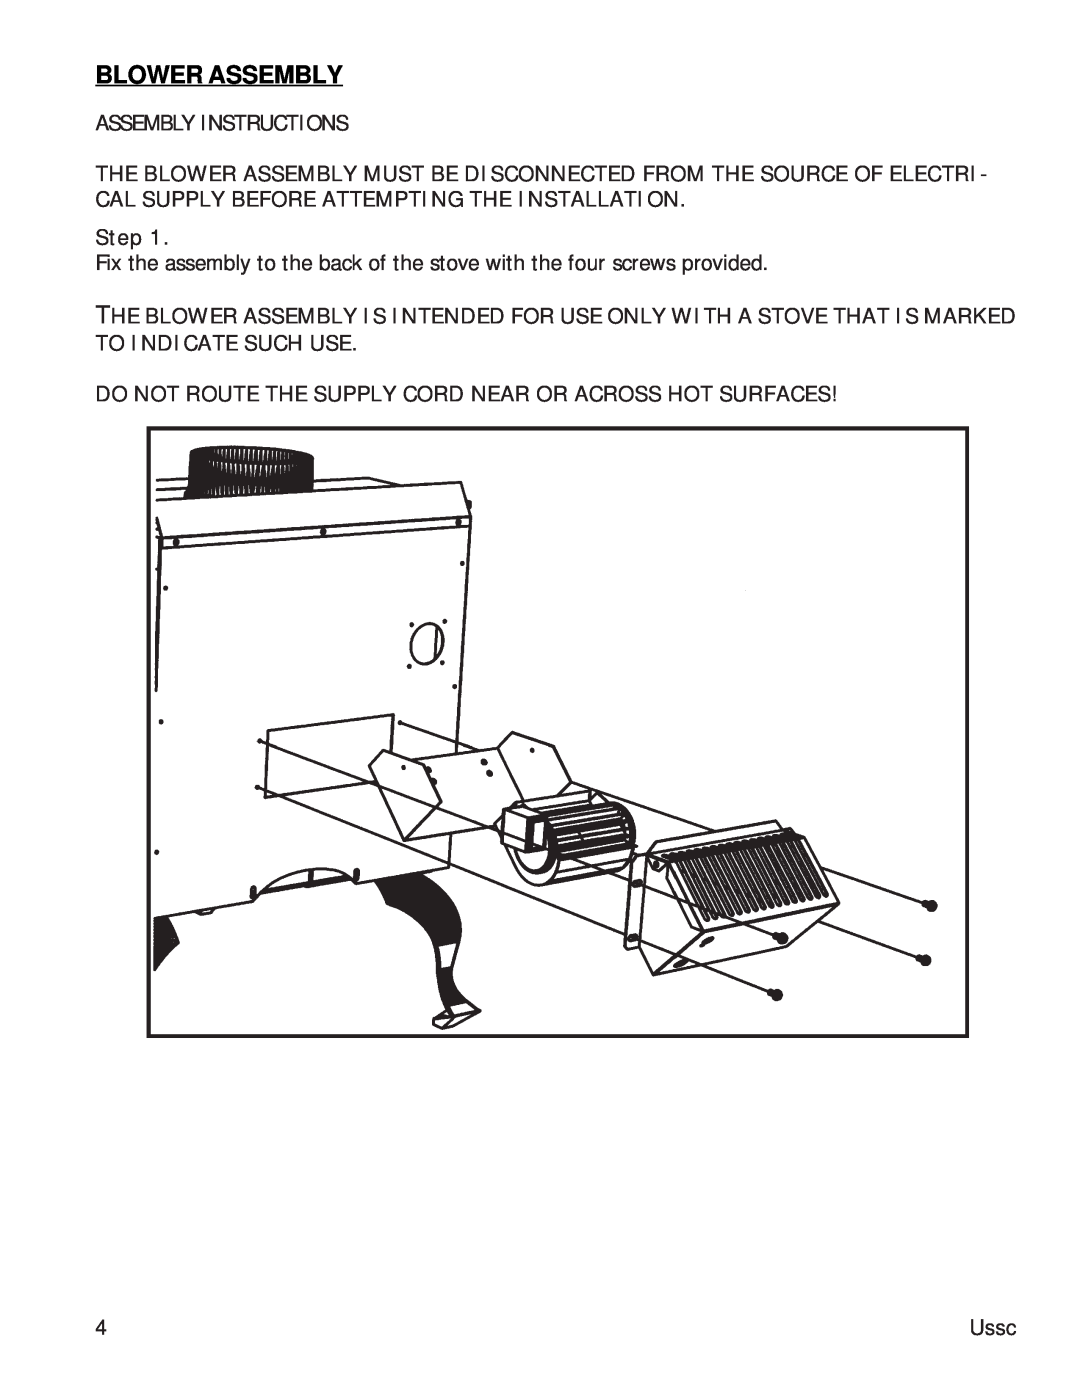 United States Stove 2015 instruction manual Blower Assembly, Assembly Instructions 